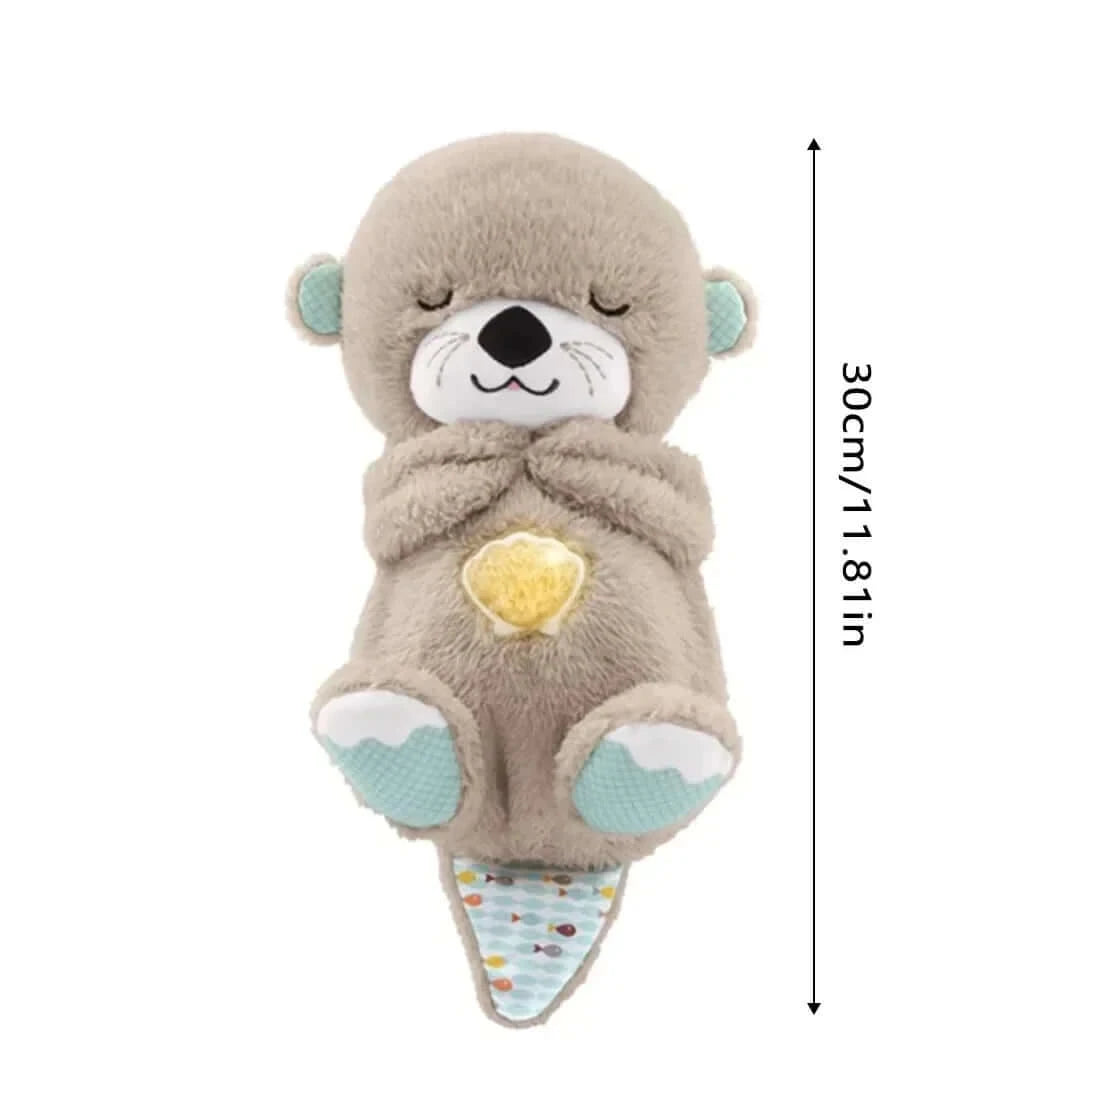 Dreamy Otter Sleepytime Plush Toy - Baby Comfort Pillow and Music Box | $50.99